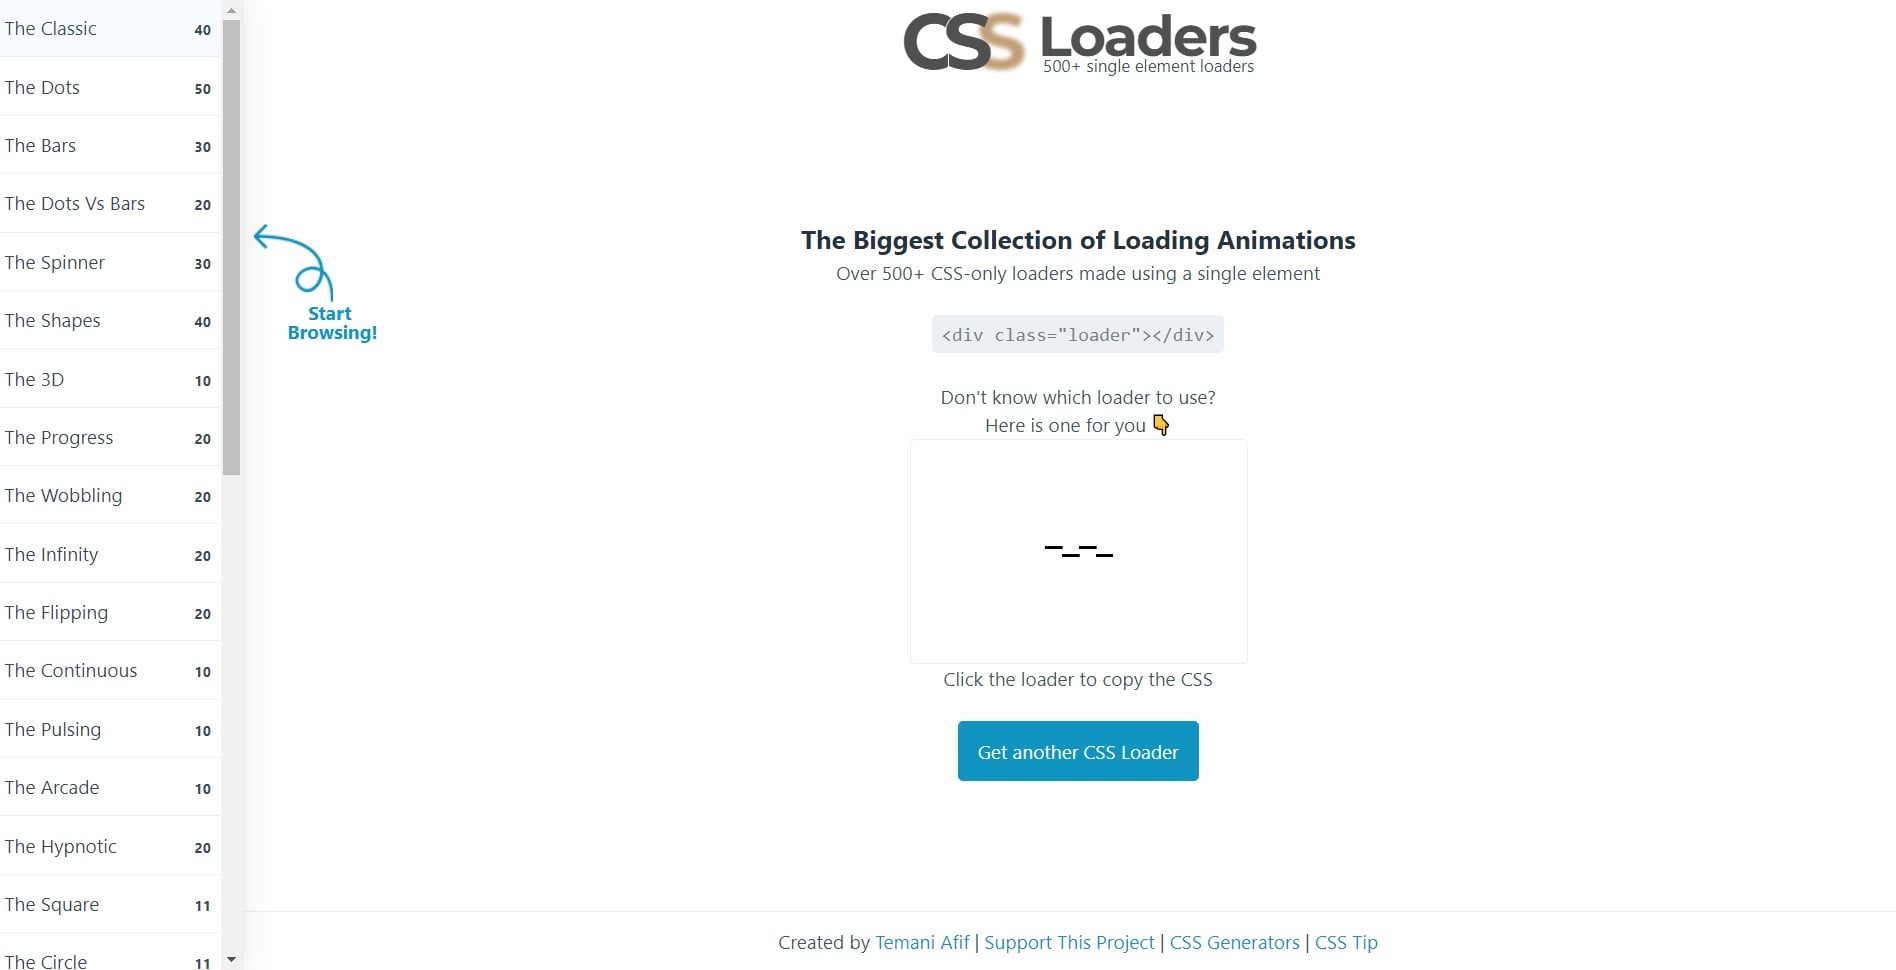 CSS Loaders